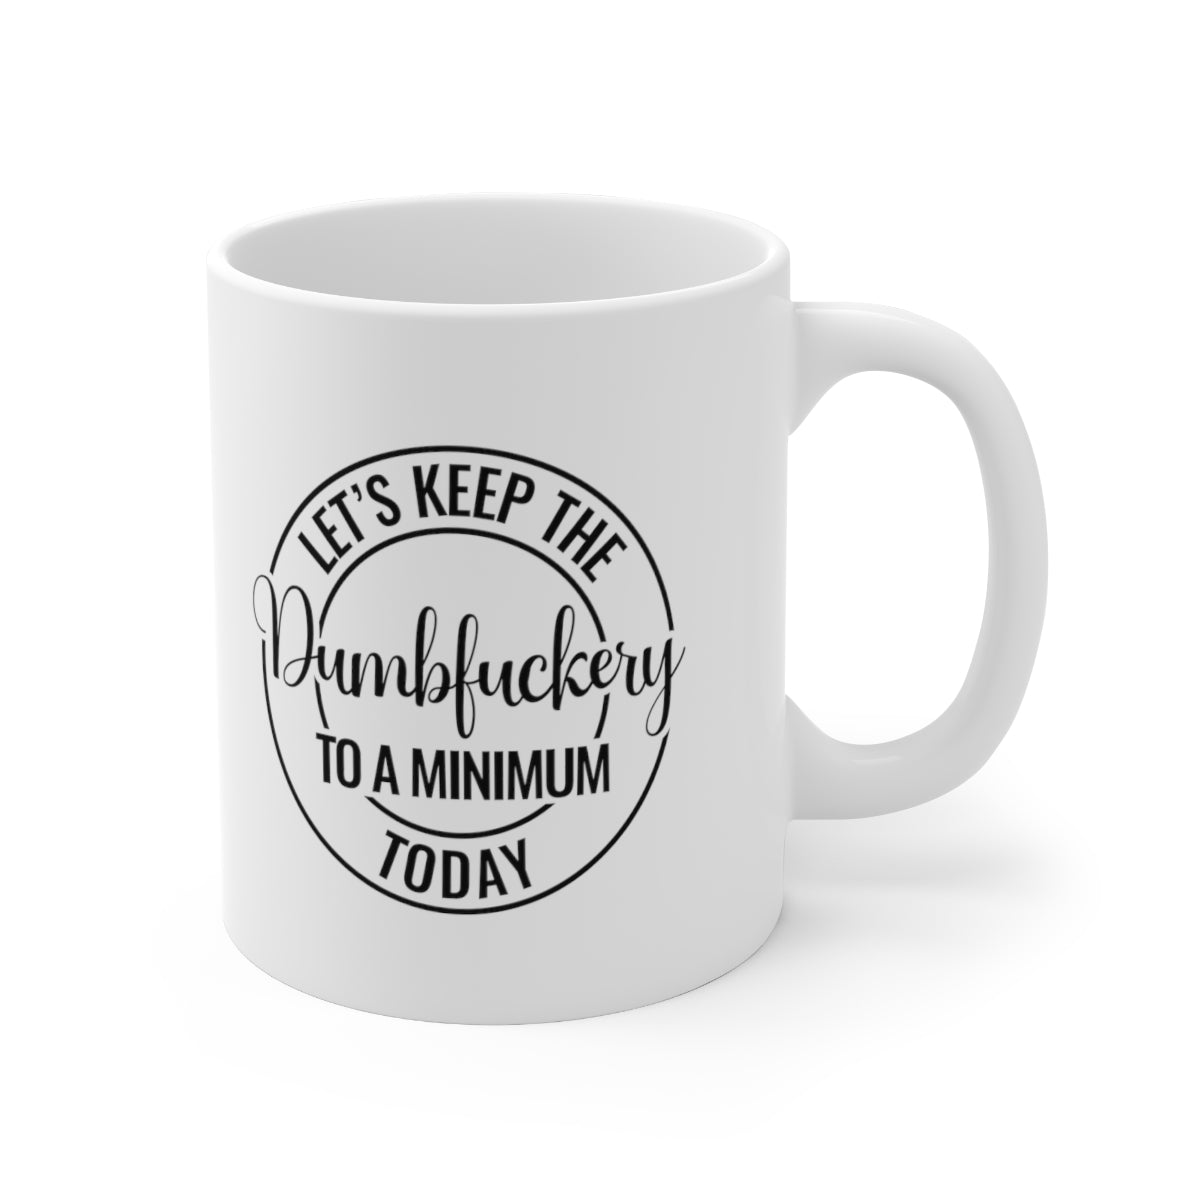 Let’s Keep the Dumbf*ckery to a minimum Today Mug